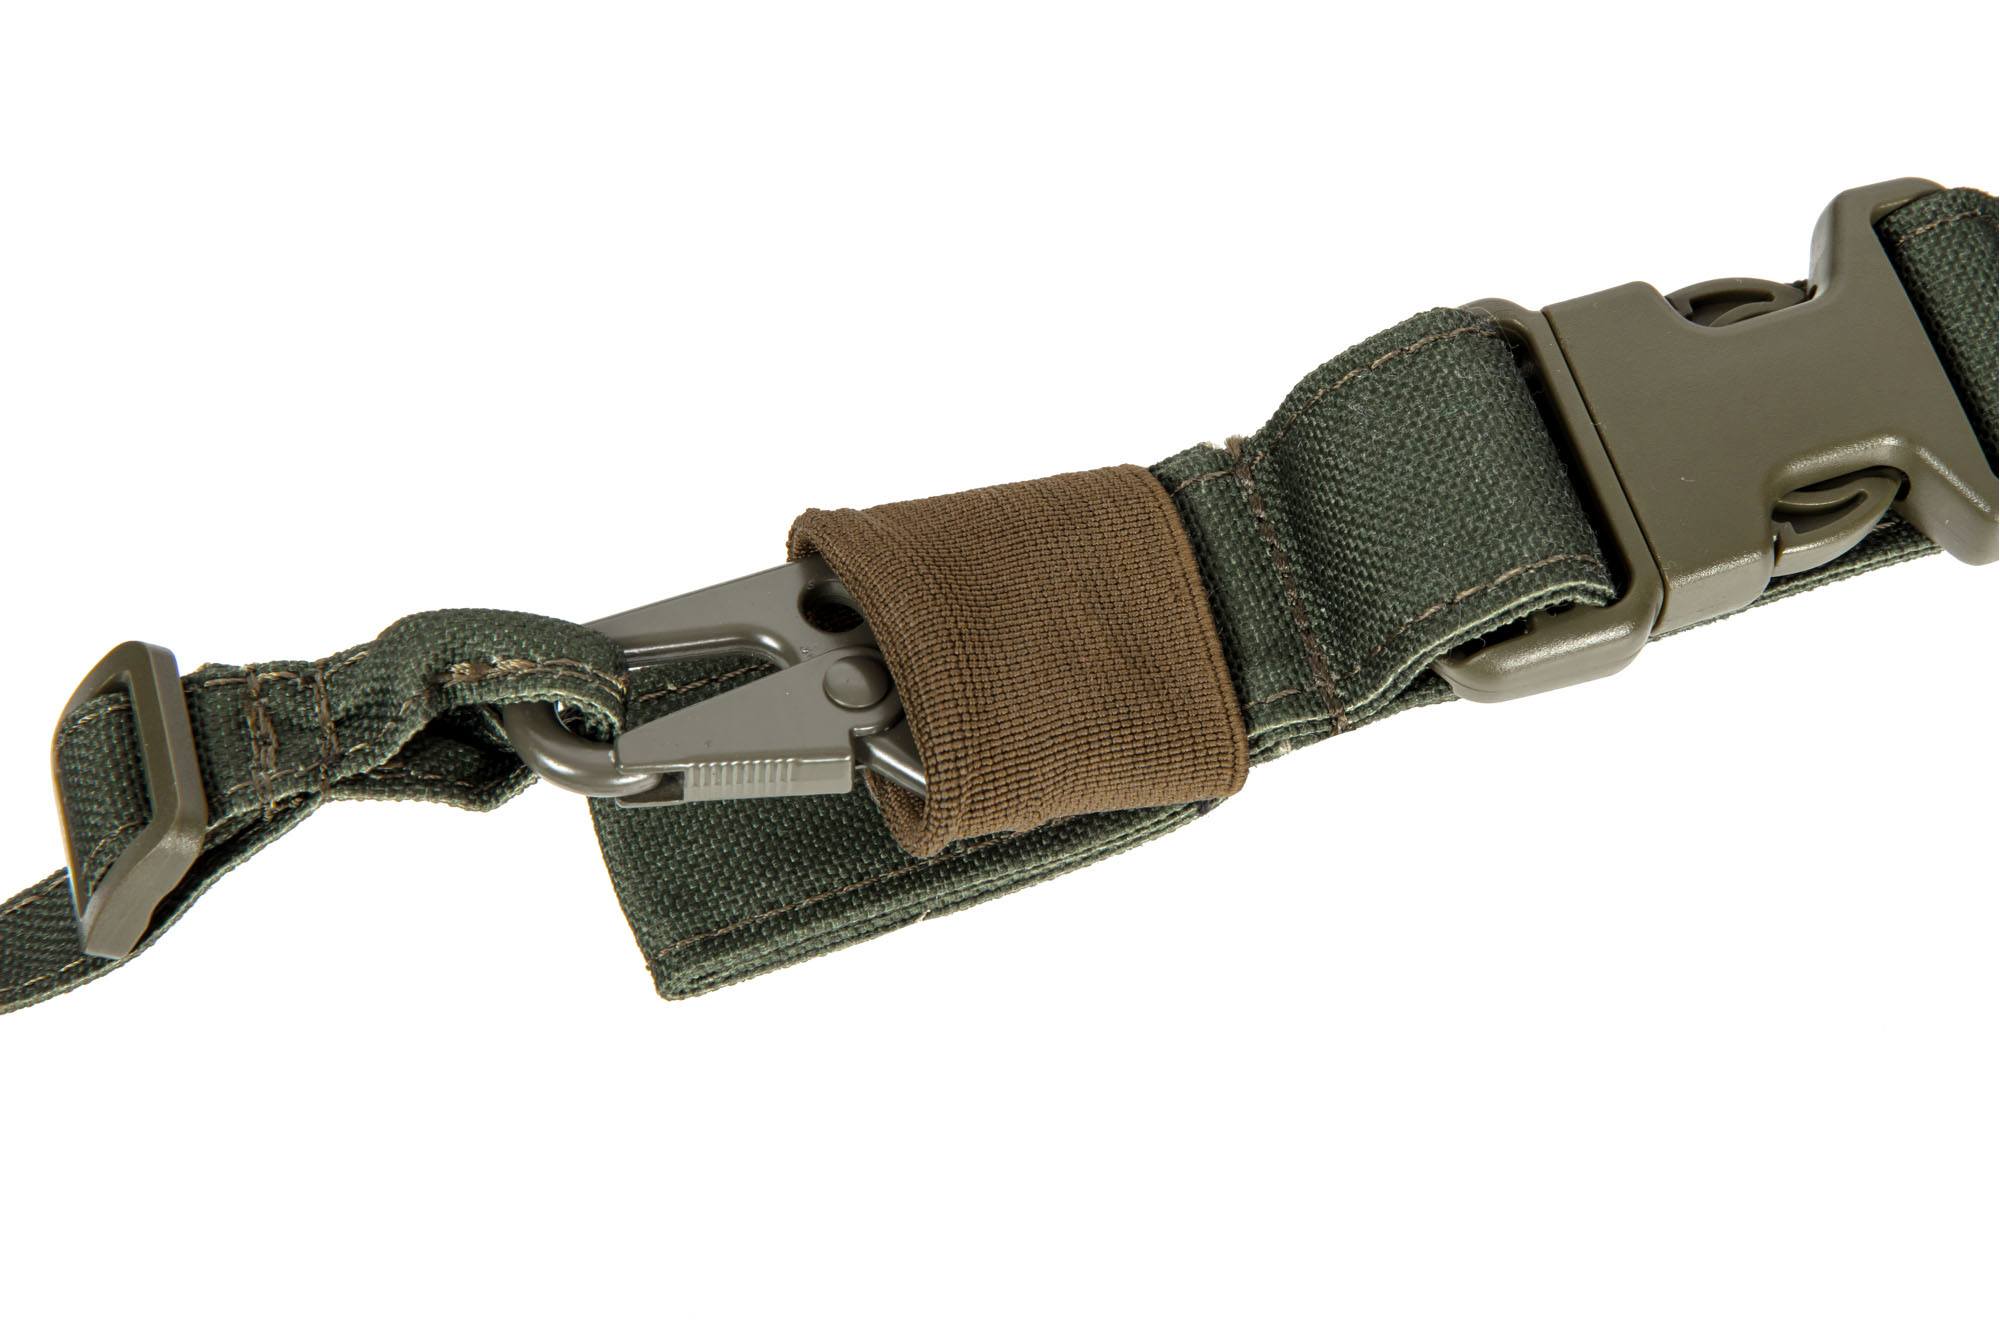 Three-Point Specna Arms II Tactical Sling - Olive Drab by Specna Arms on Airsoft Mania Europe